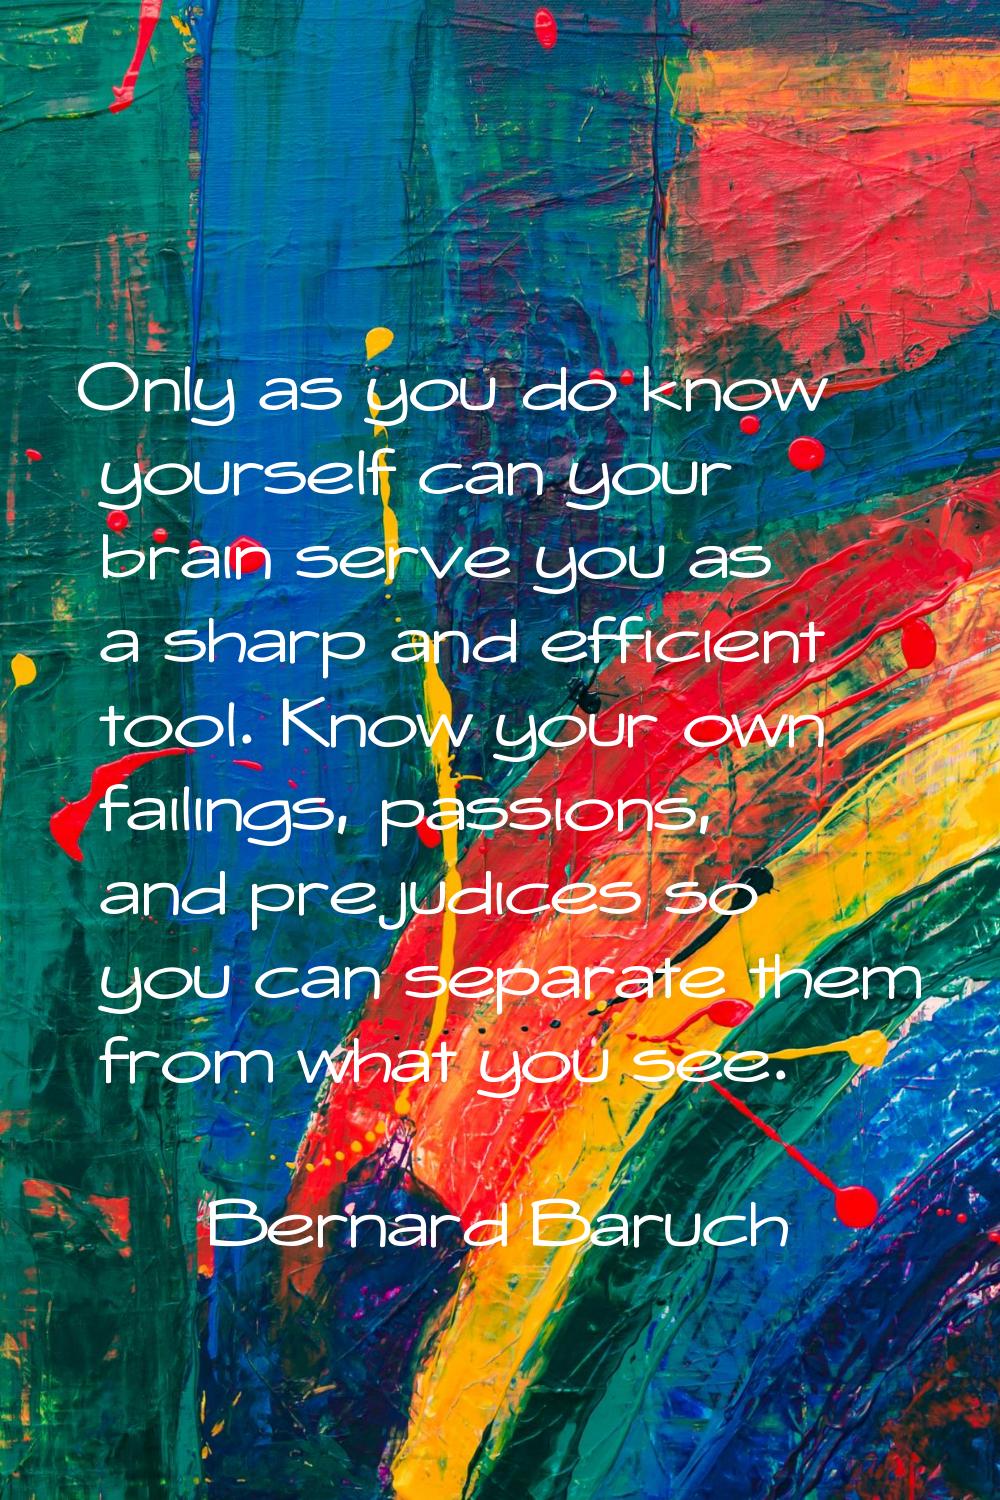 Only as you do know yourself can your brain serve you as a sharp and efficient tool. Know your own 